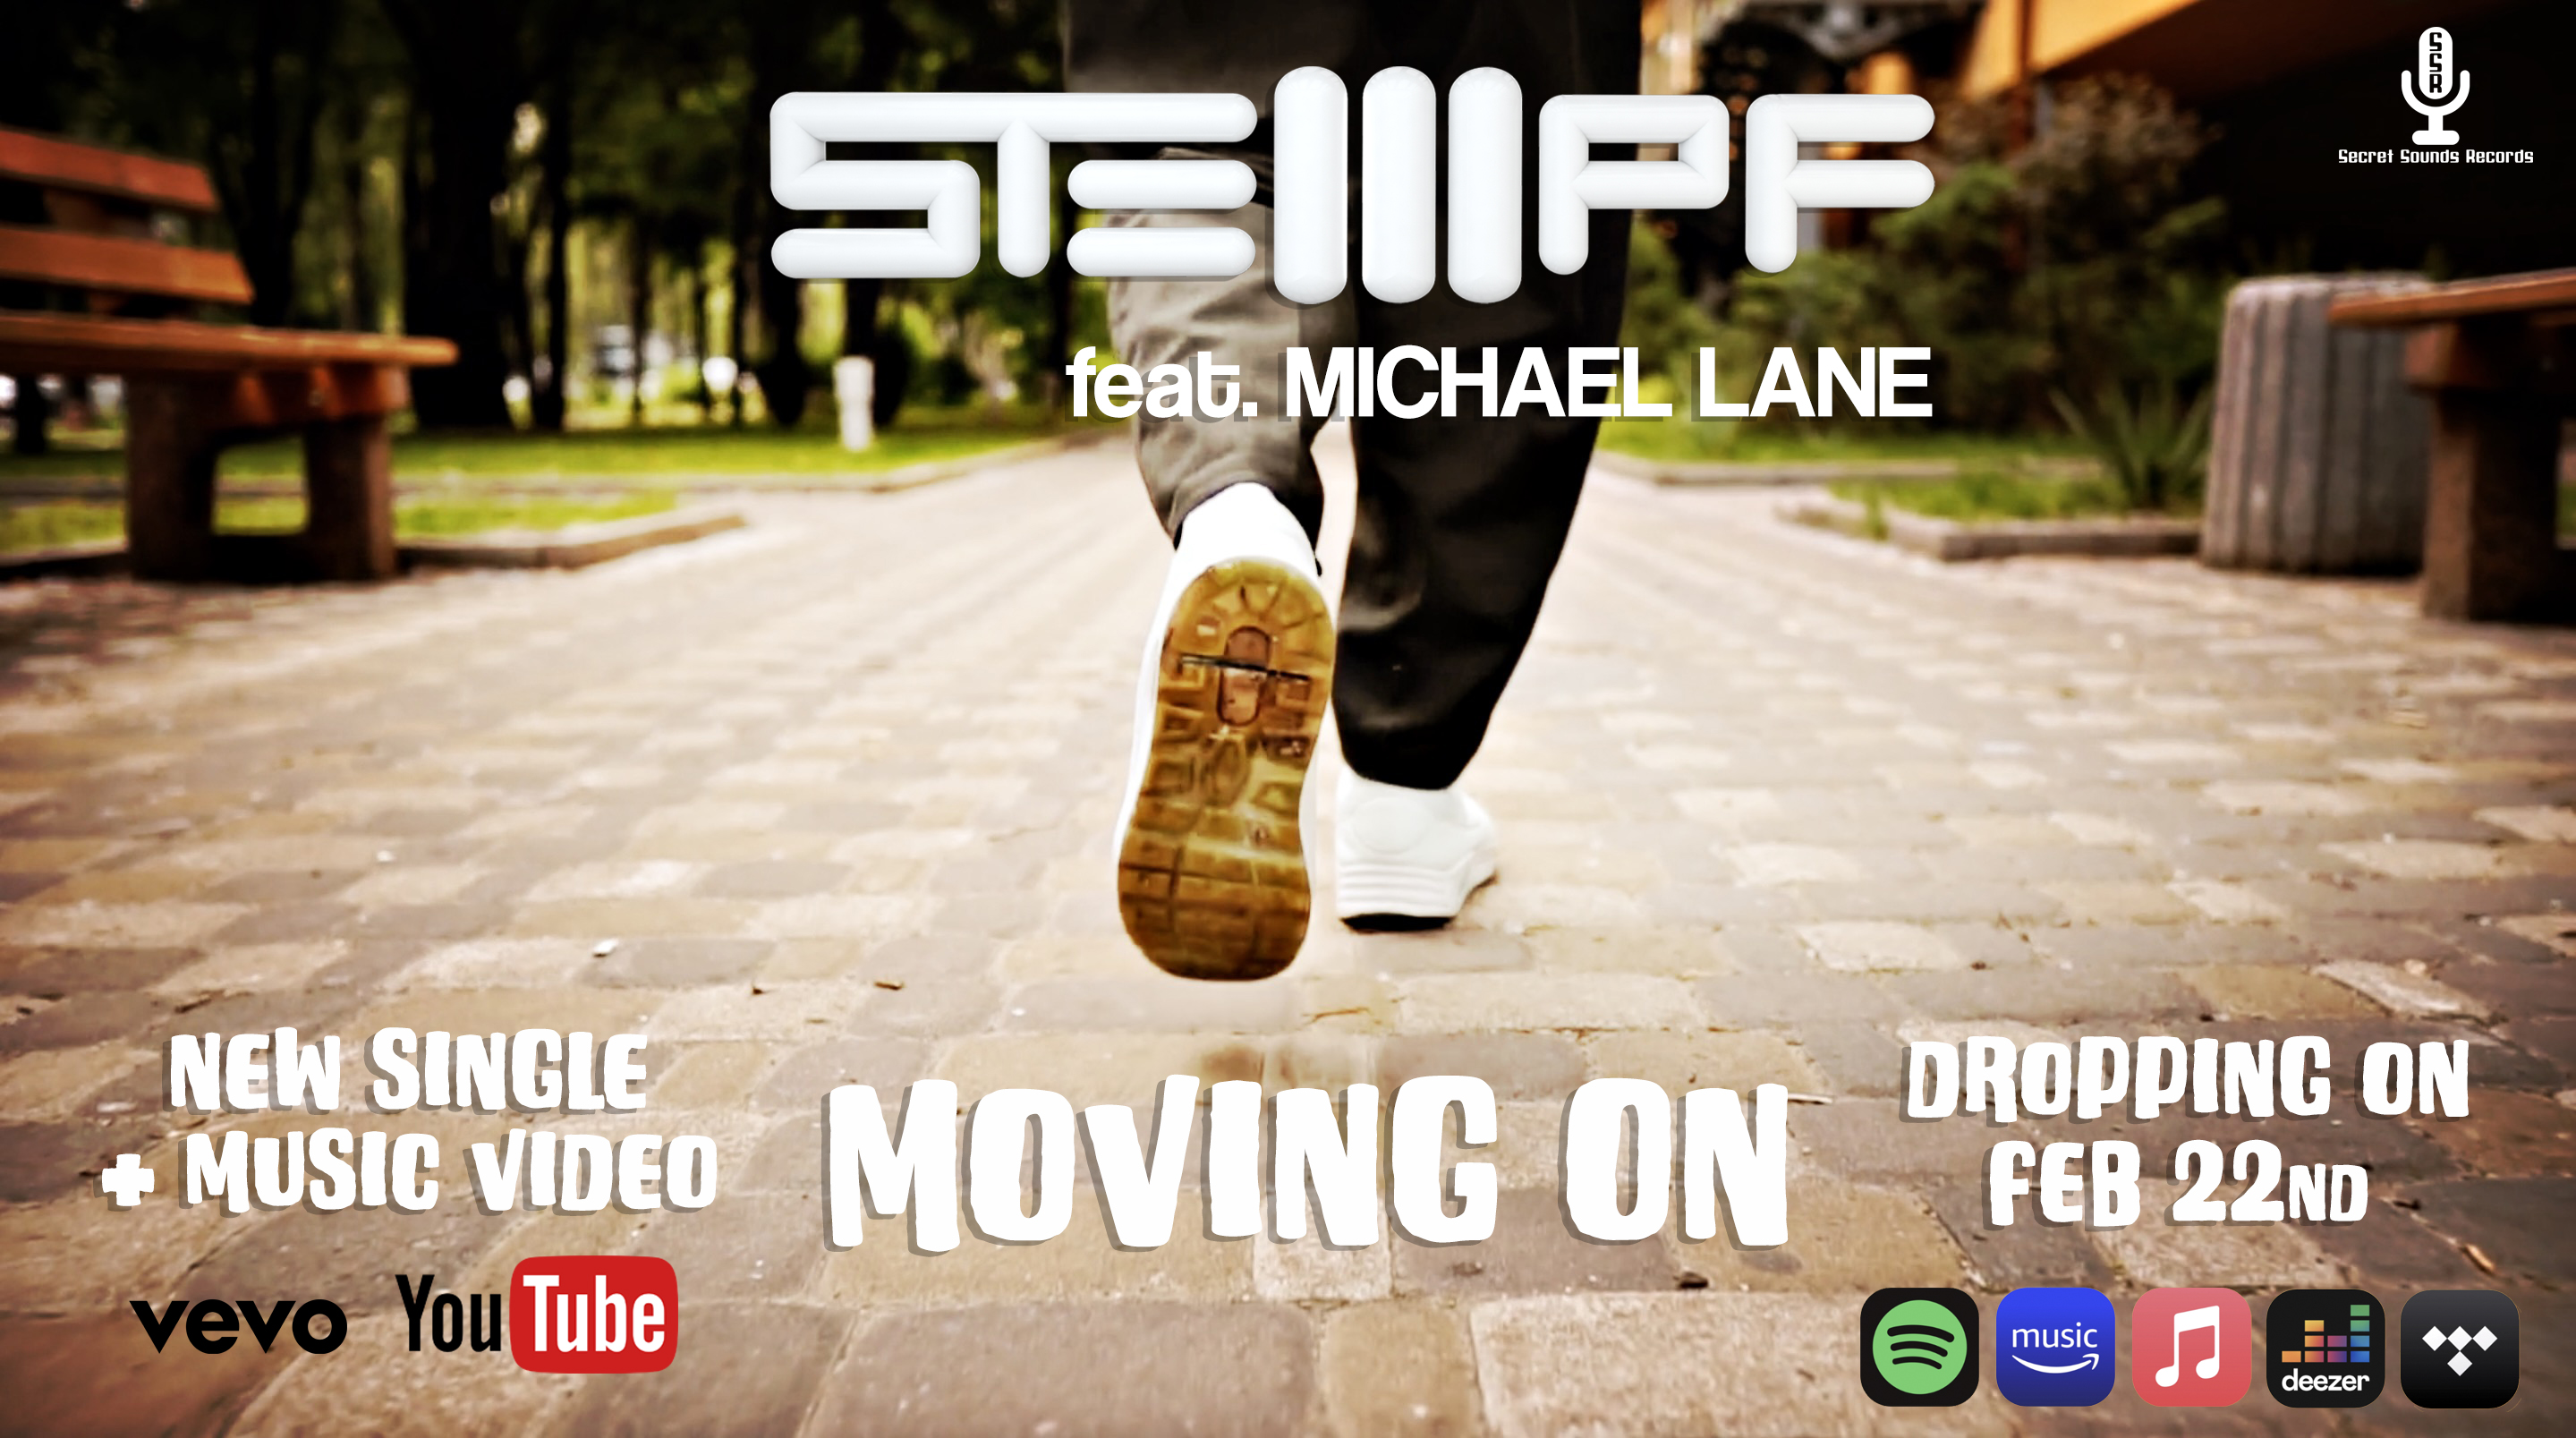 New Single "Moving On" featuring Michael Lane is dropping on the 22nd of February!
It's the first single of stempf's debut album "UNO" (release date: 1st March 2022).

Massive thanks to the German copyright collection society GVL for supporting the production and realisation of this single and album release with their "Neustart Kultur" grant. 